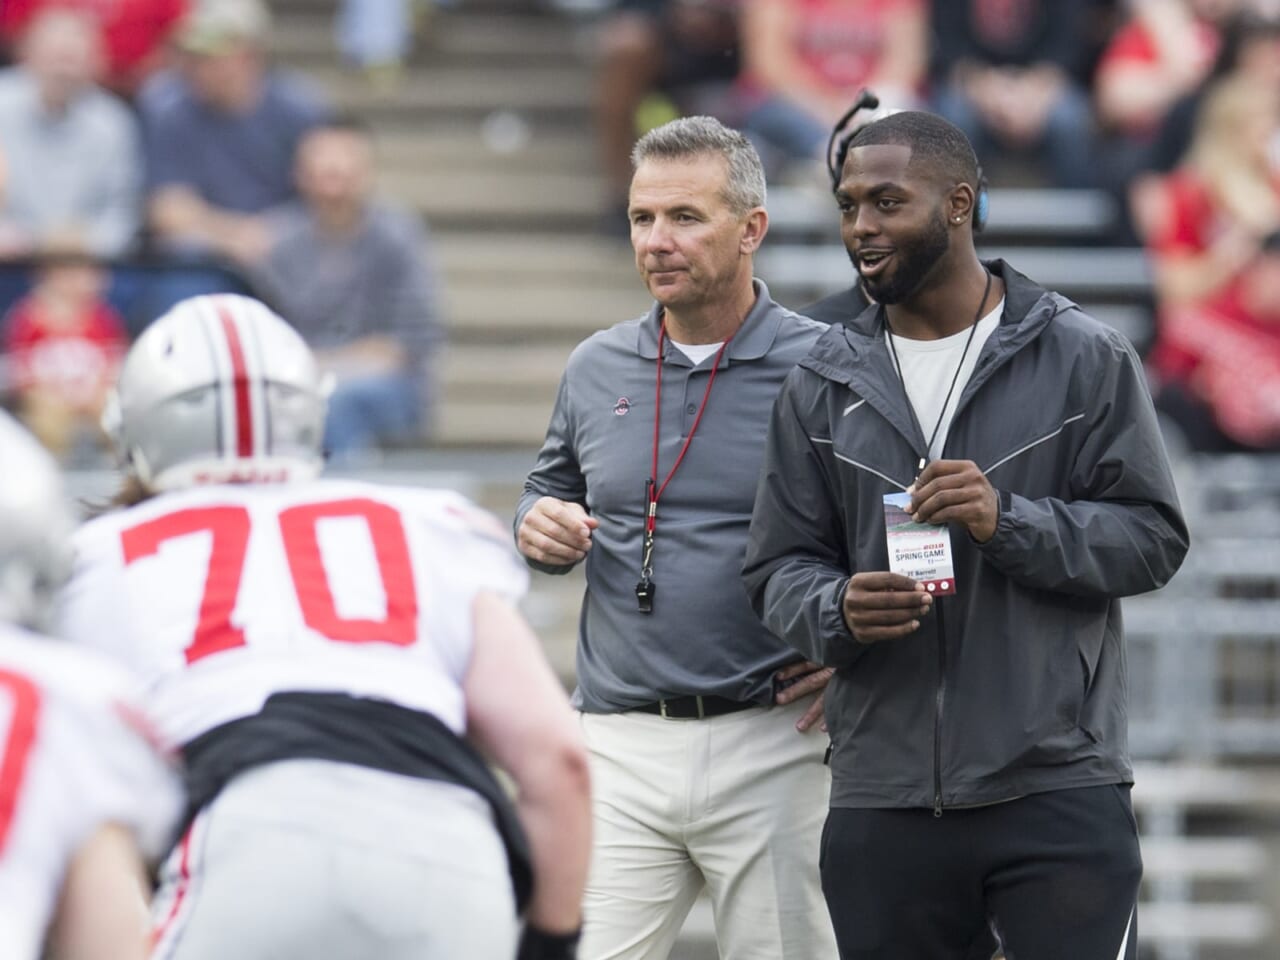 Ohio State Football: What Are The Buckeyes’ Expectations In 2018?